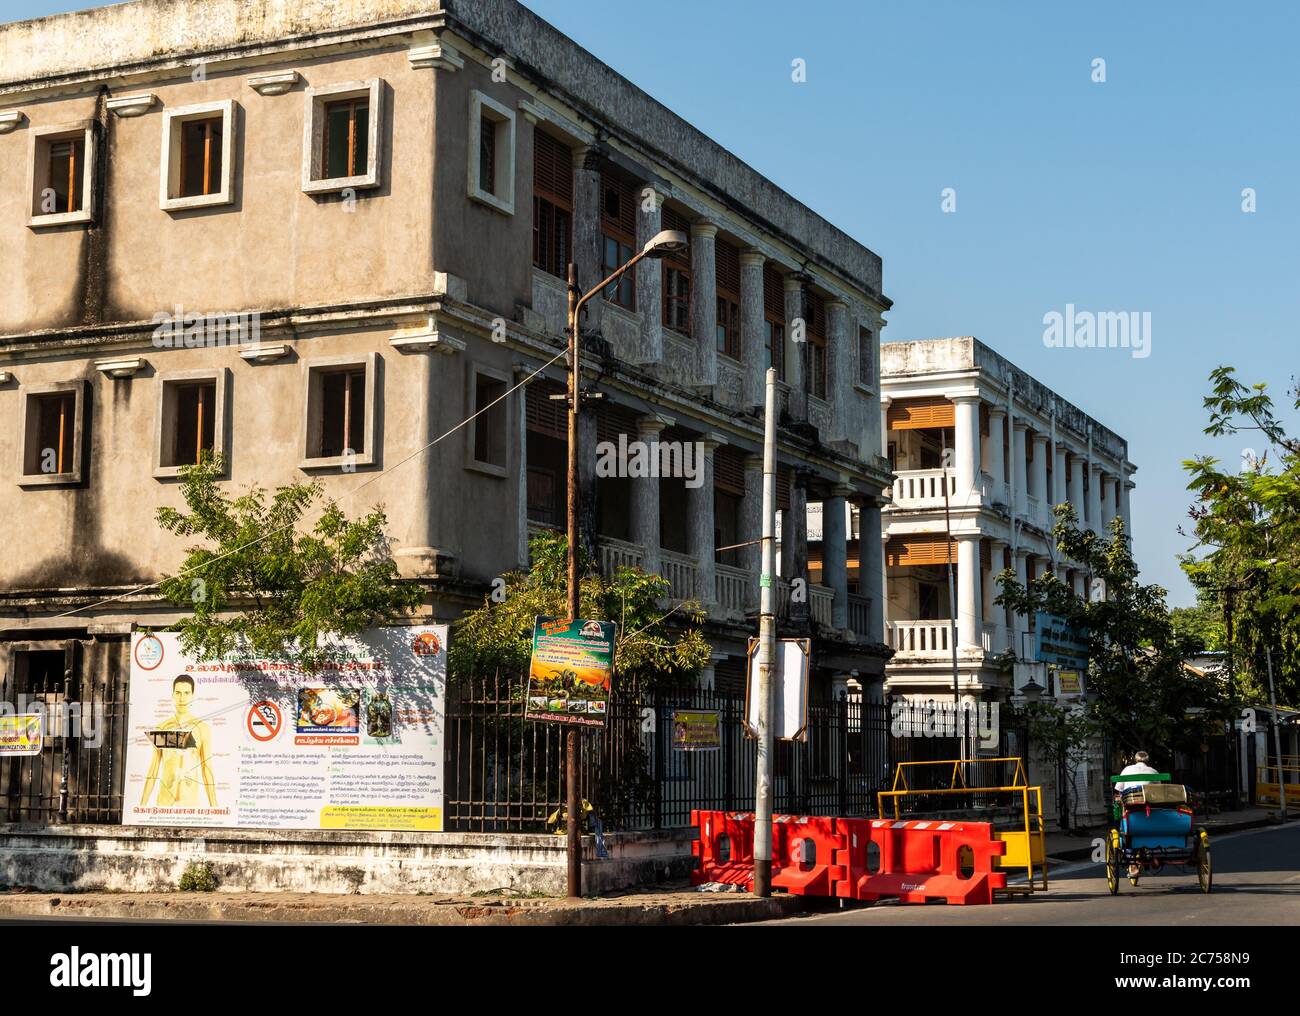 Pondicherry. India - February 2020: Old French architecture on the streets of the White Town. Stock Photo